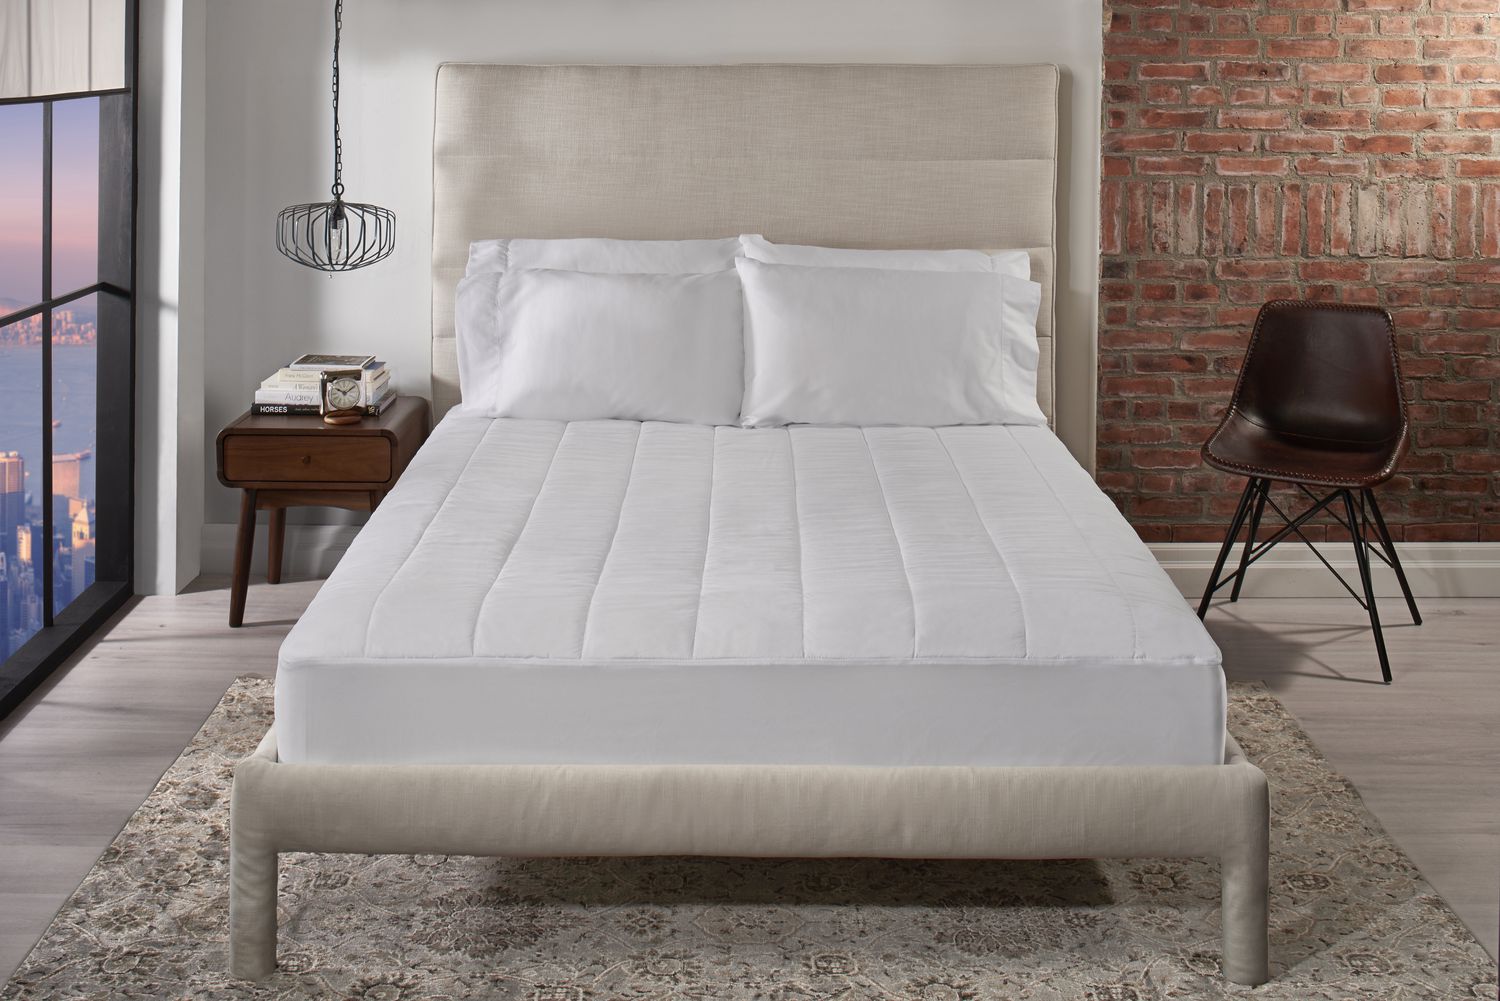 sunbeam twin extra long quilted heated mattress pad